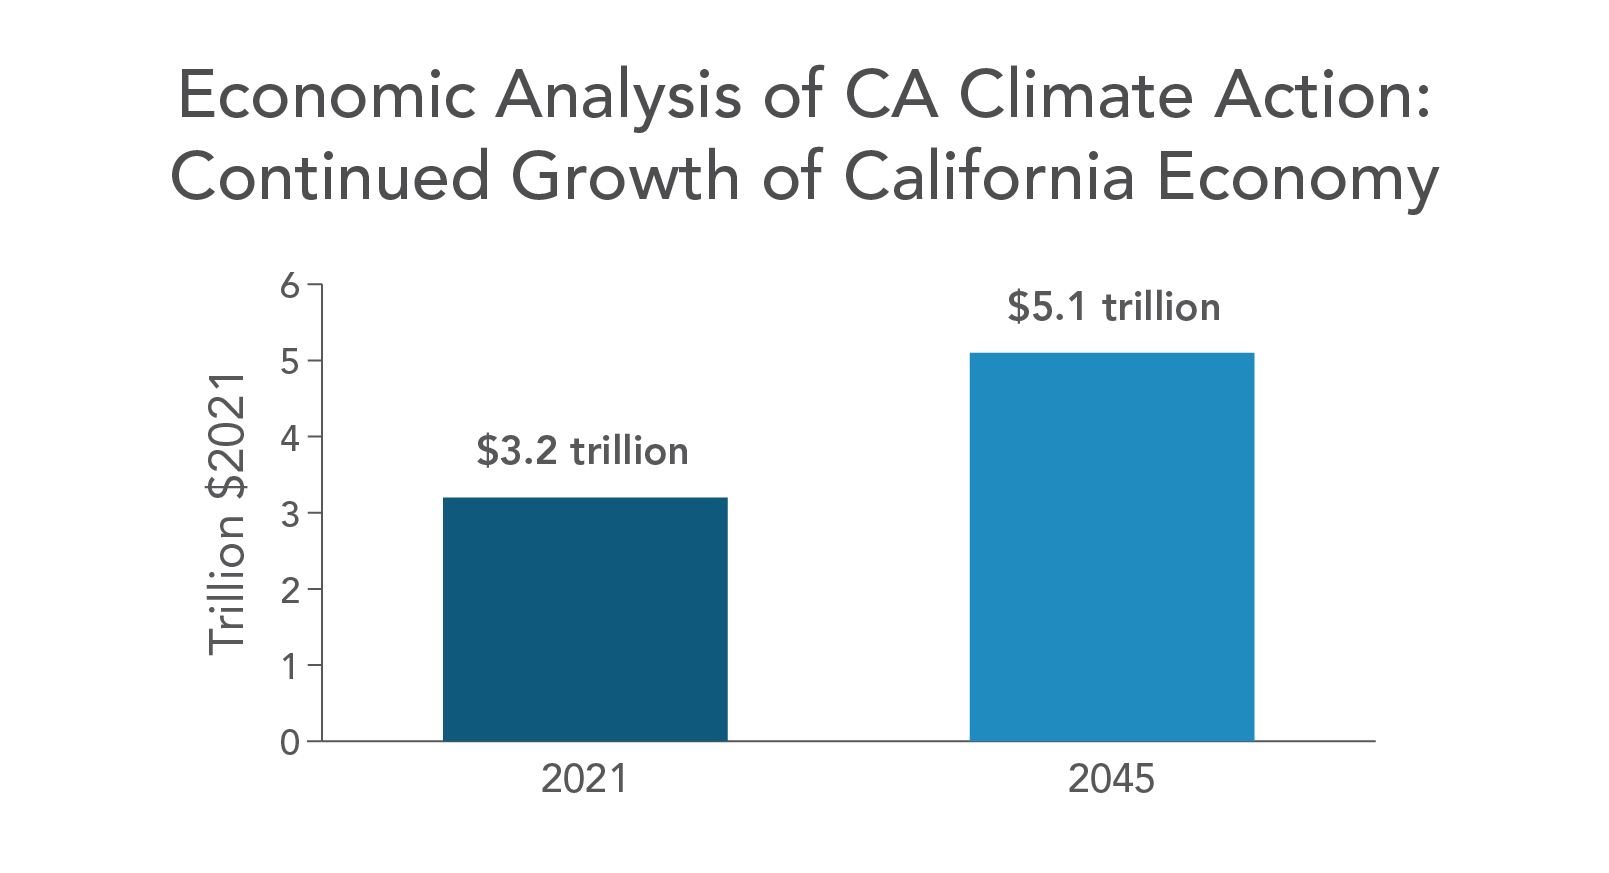 Economic analysis of CA climate action: continued growth of California Economy. Bar chart showing growth in GDP from $3.2 trillion in 2021 to $5.1 trillion in 2045